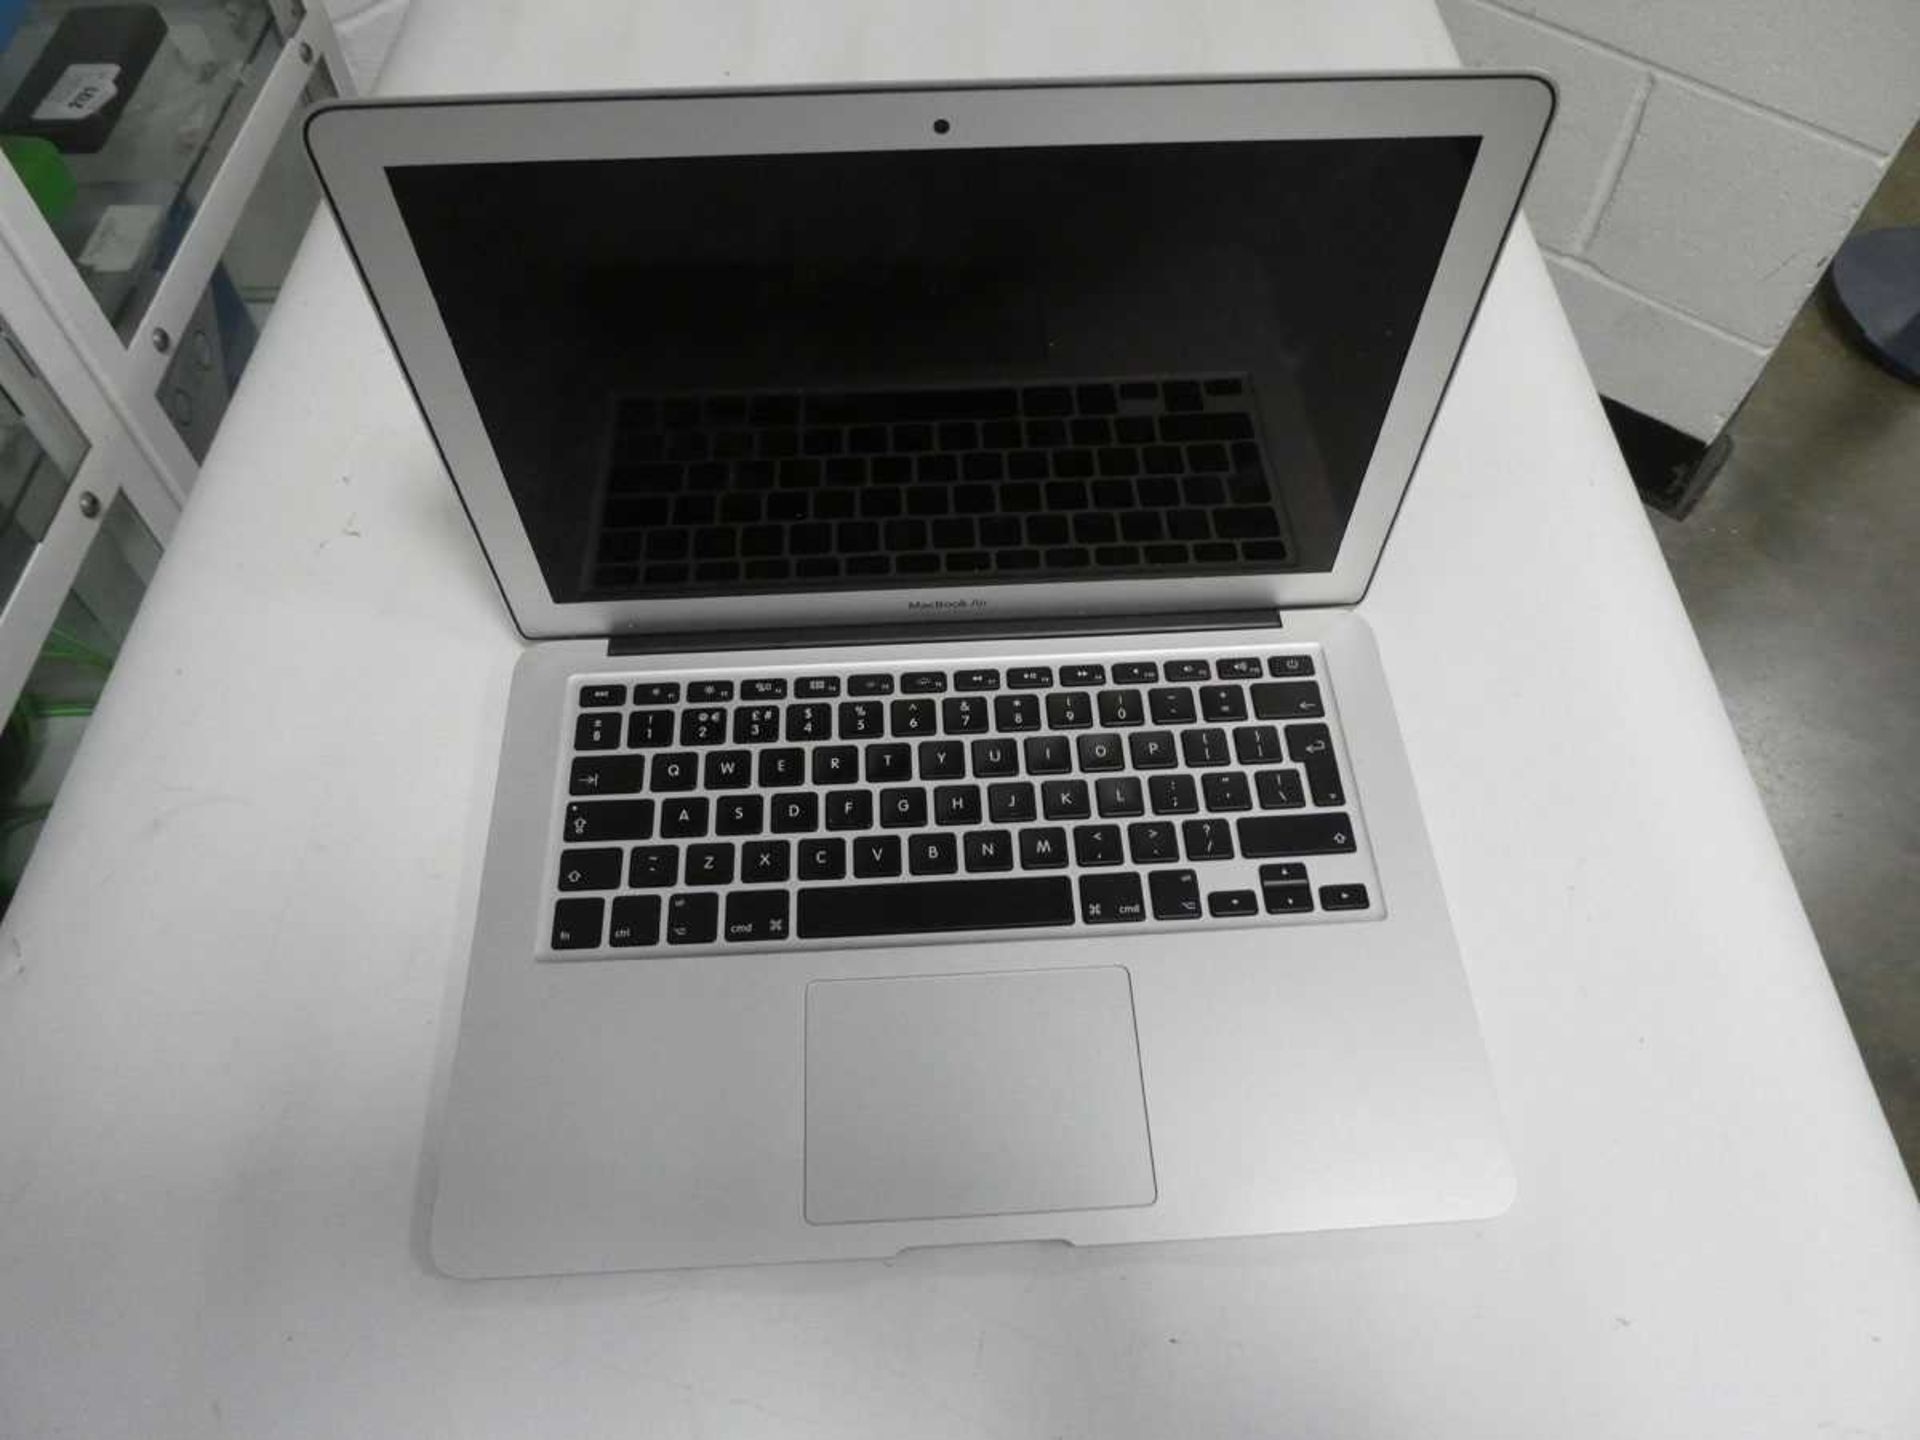 +VAT MacBook 13" Air 2015 A1466 Silver laptop with Intel i5 - 1.6GHz, 8GB RAM and 512GB SSD